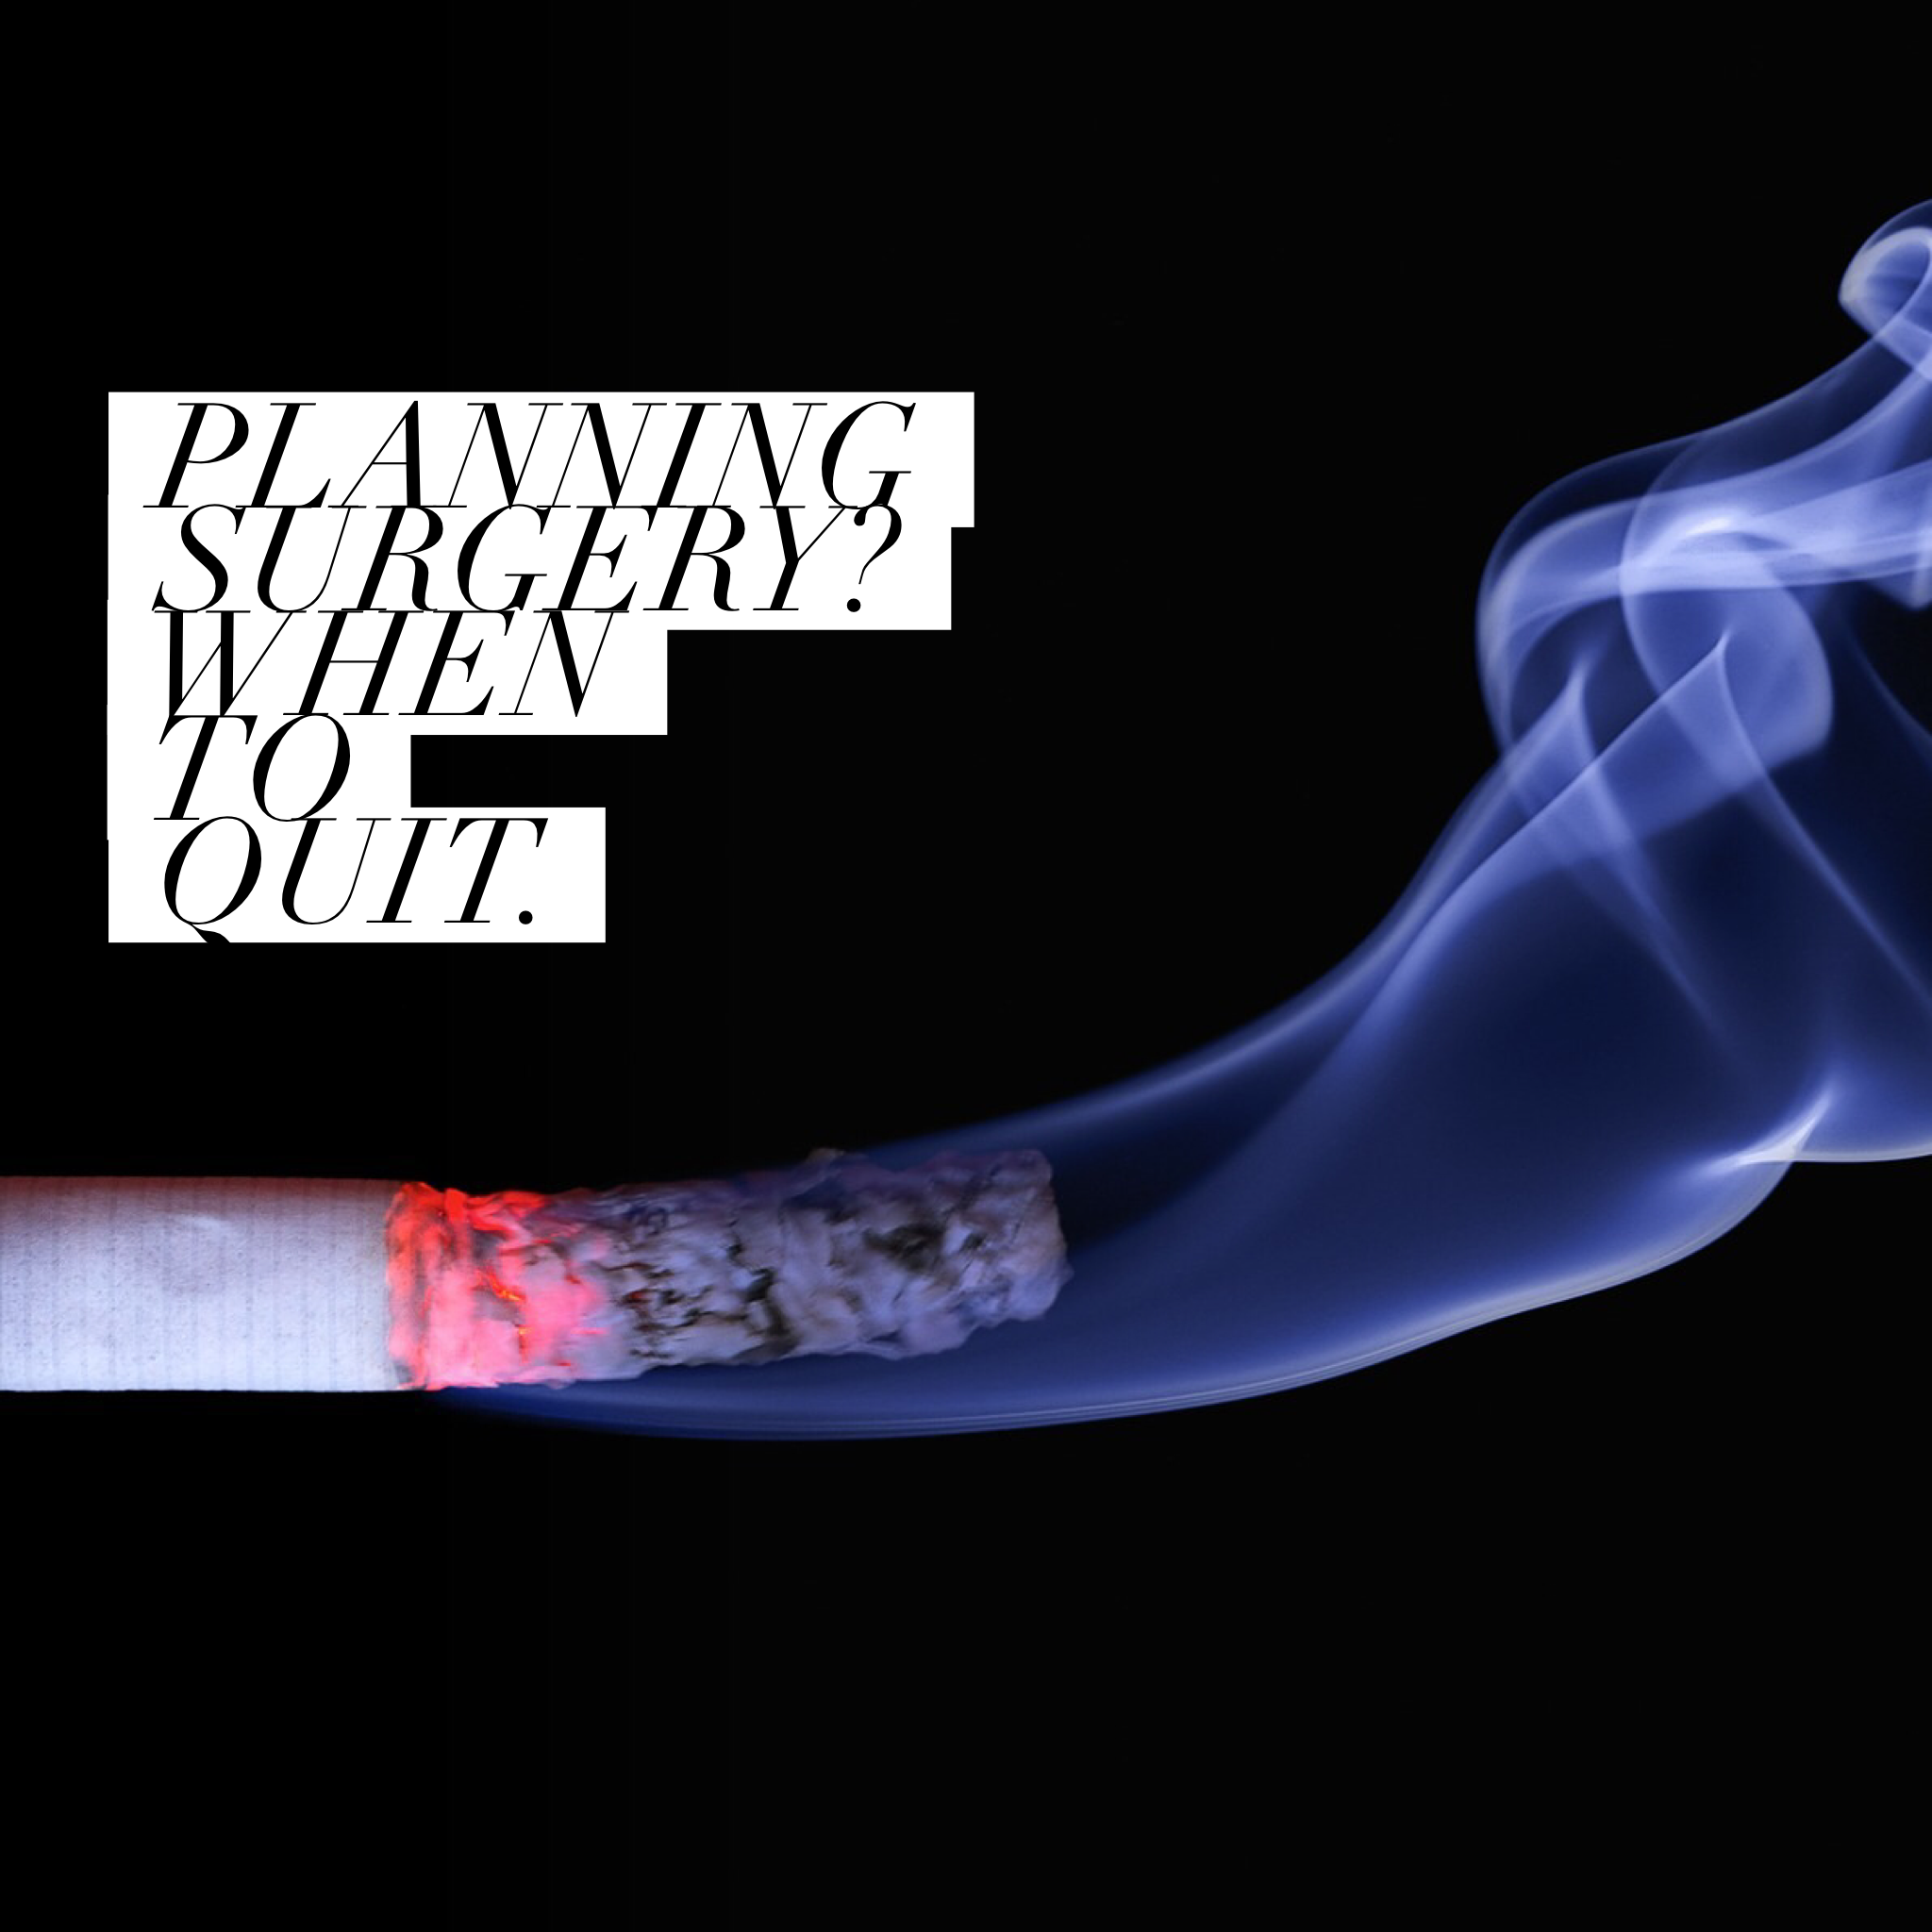 Guidelines on smoking in the peri